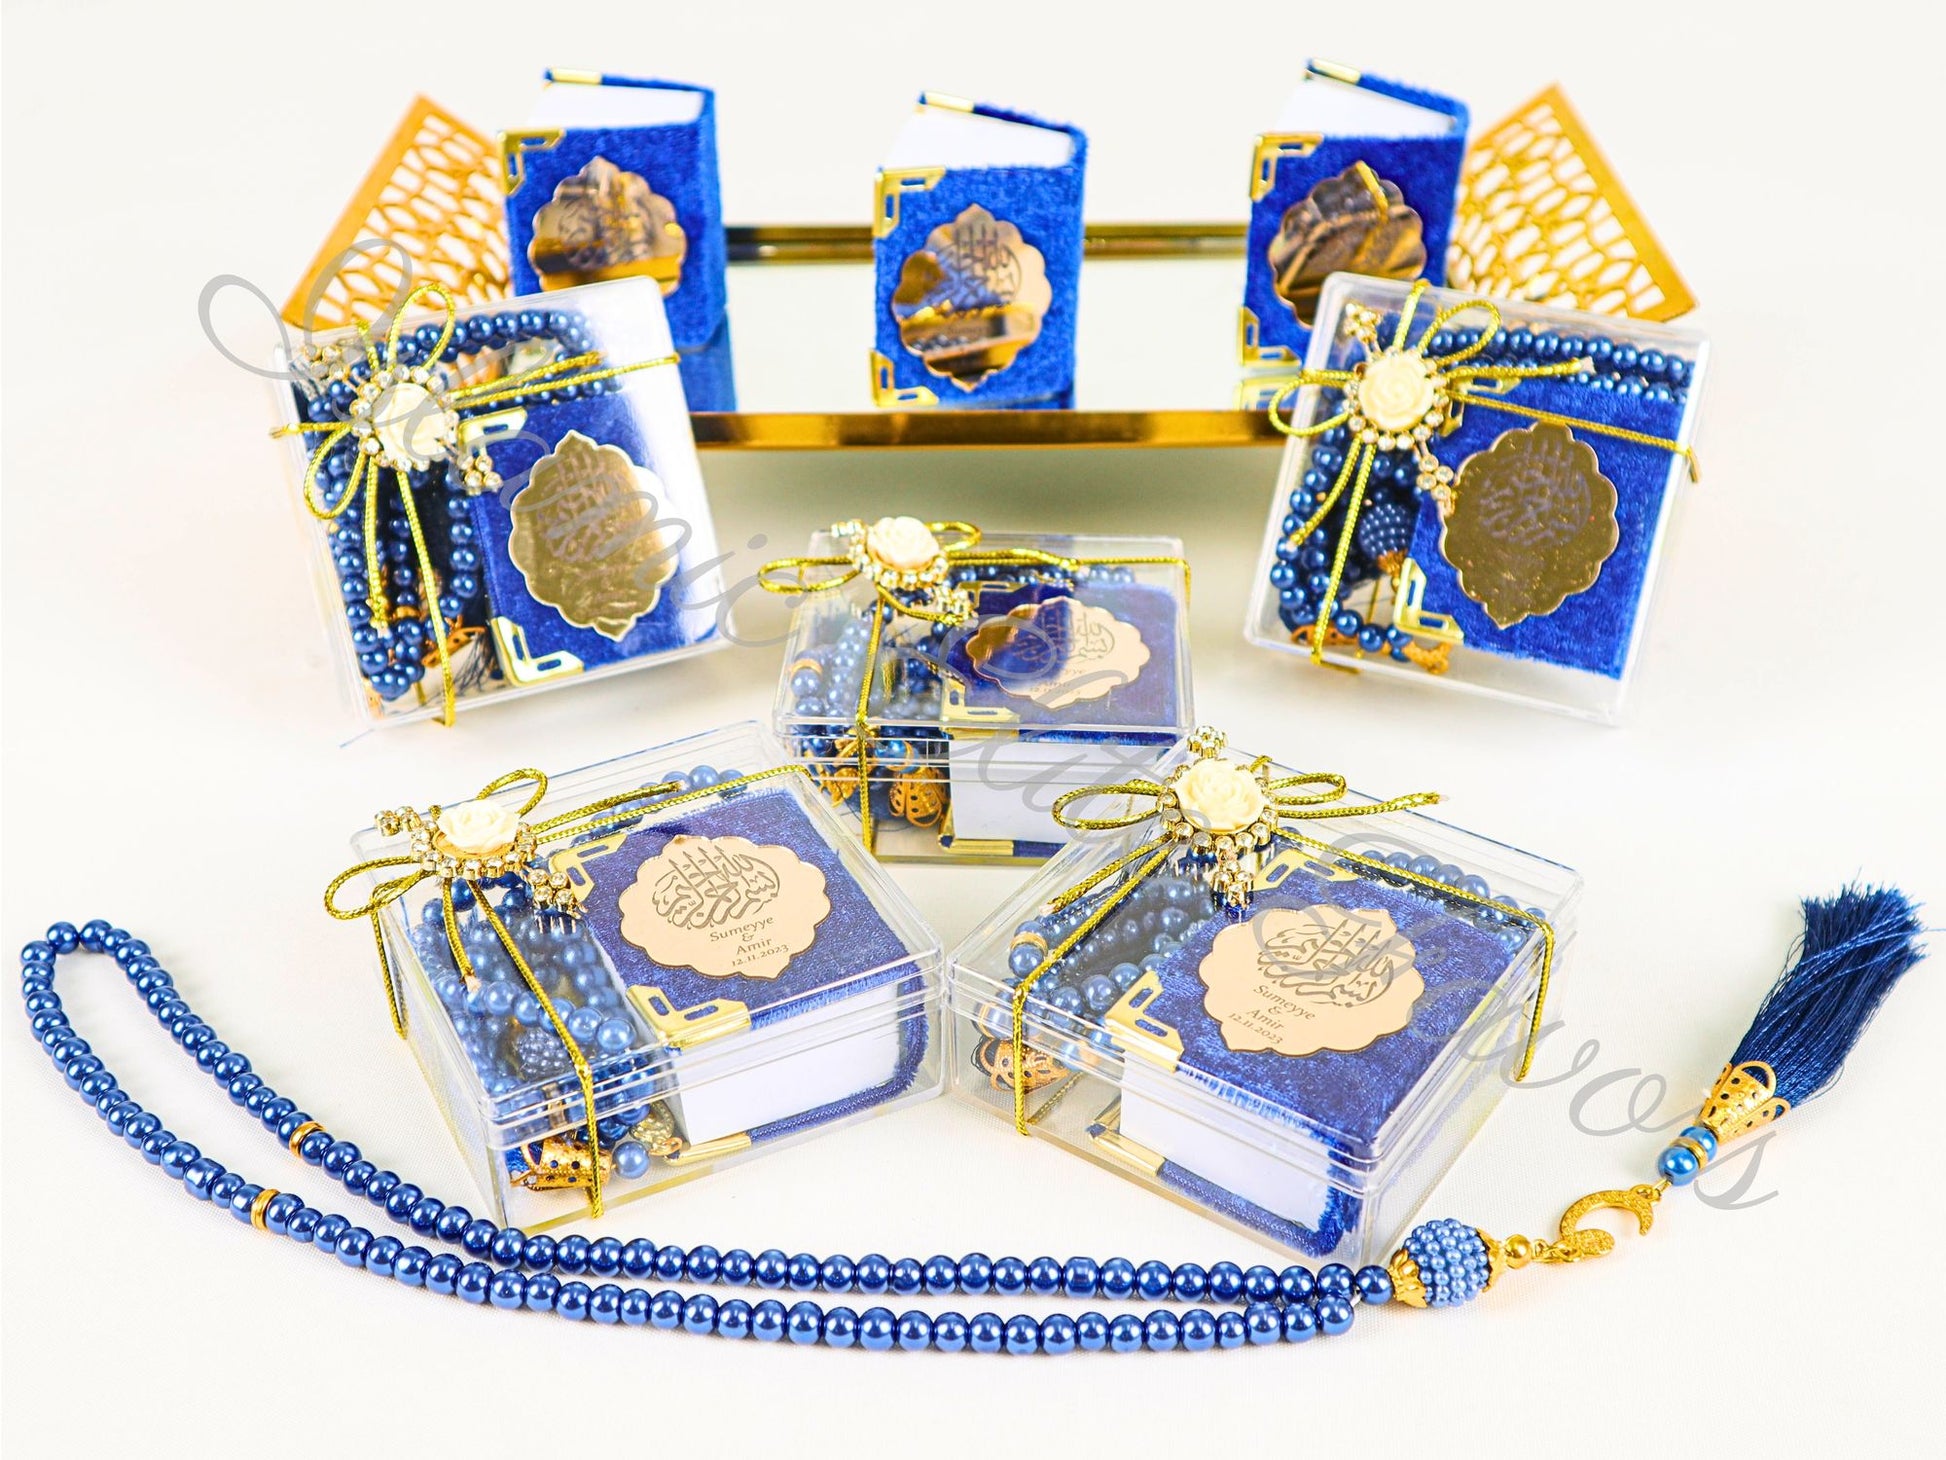 Personalized Mini Quran Tasbeeh Flowers with Rhinestones Wedding Favor - Islamic Elite Favors is a handmade gift shop offering a wide variety of unique and personalized gifts for all occasions. Whether you're looking for the perfect Ramadan, Eid, Hajj, wedding gift or something special for a birthday, baby shower or anniversary, we have something for everyone. High quality, made with love.